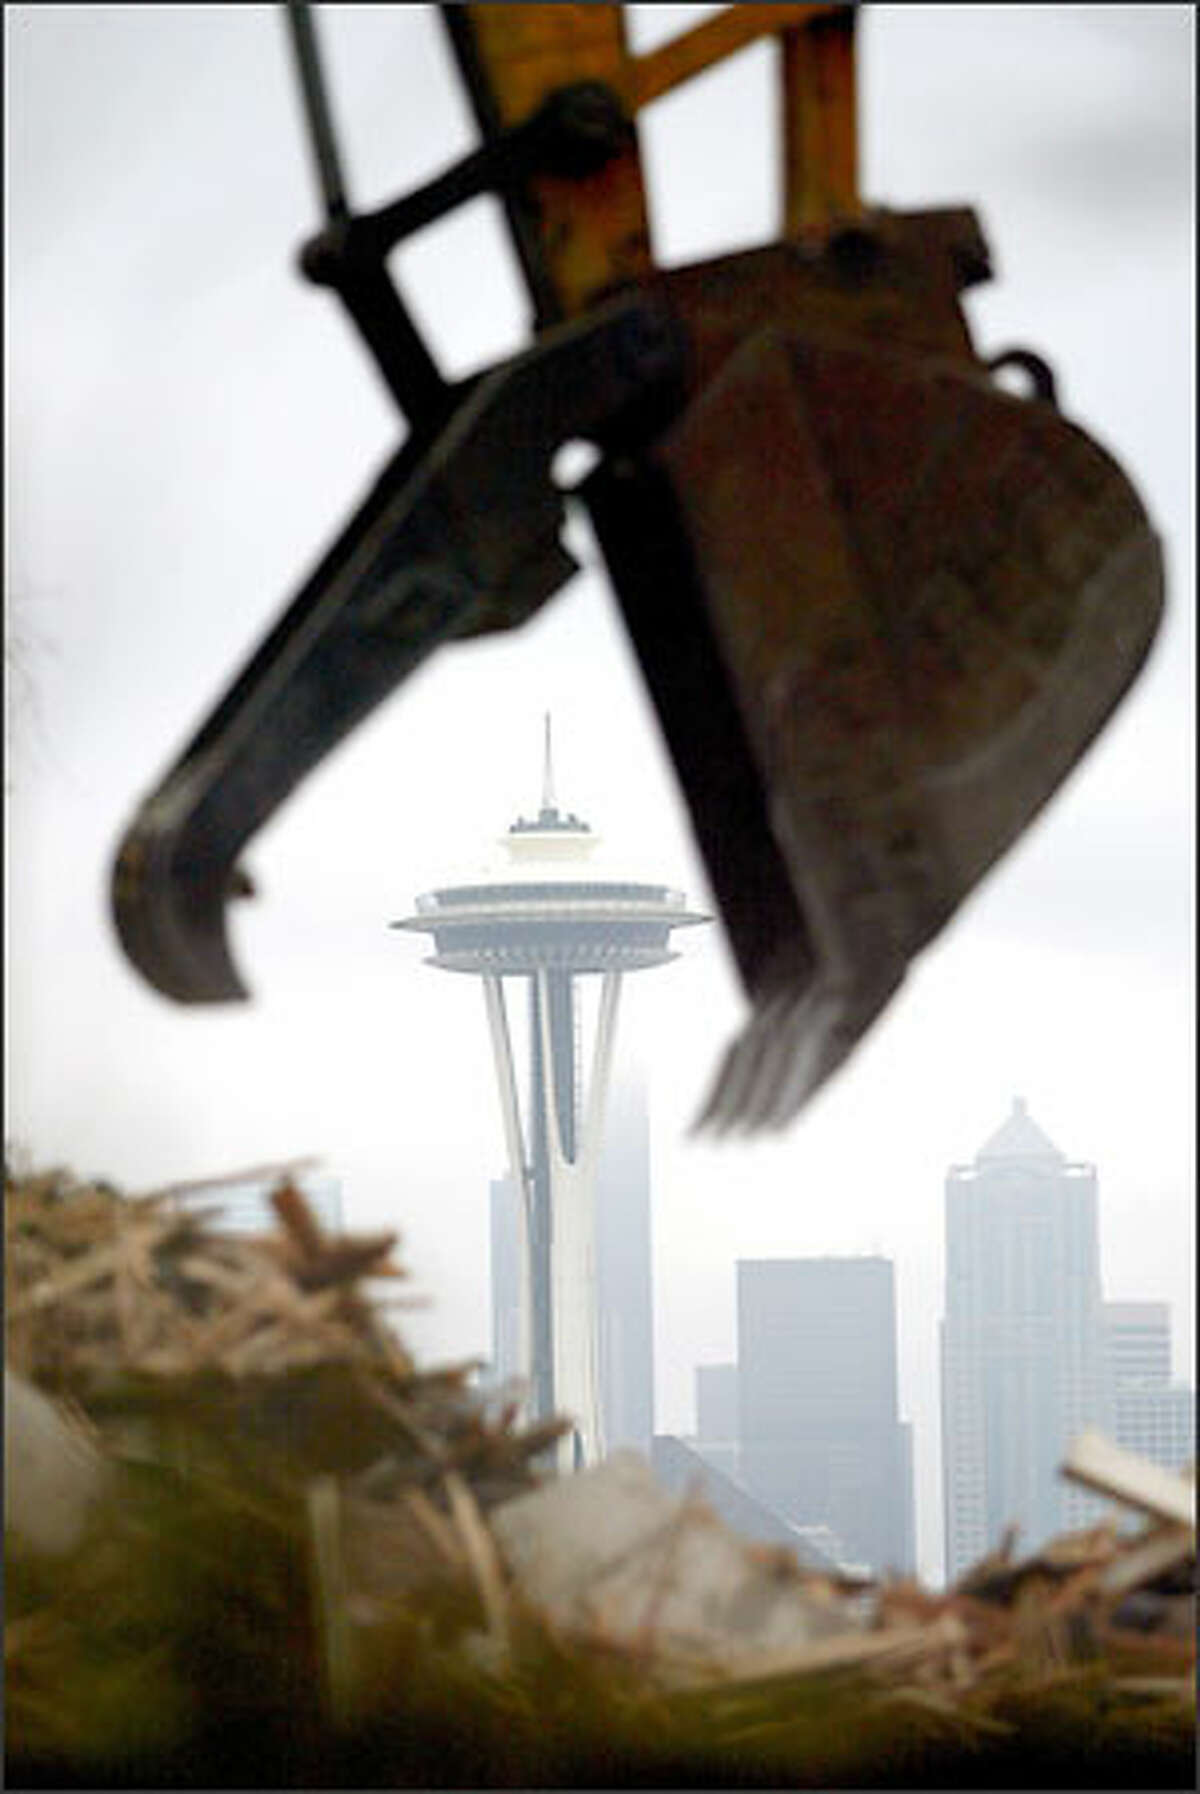 The jaws of a backhoe look as if they're about to devour the Space Needle as the operator works a pile of debris during demolition of a house on Queen Anne. The house at 222 W. Highland Drive sat across from Kerry Park Viewpoint and was built in 1914 for the J.C. Black family and designed by Andrew Willatsen, a protege of architect Frank Lloyd Wright. The house was sold last year and a permit was issued to demolish the house and garage to make room for construction of a single-family residence.